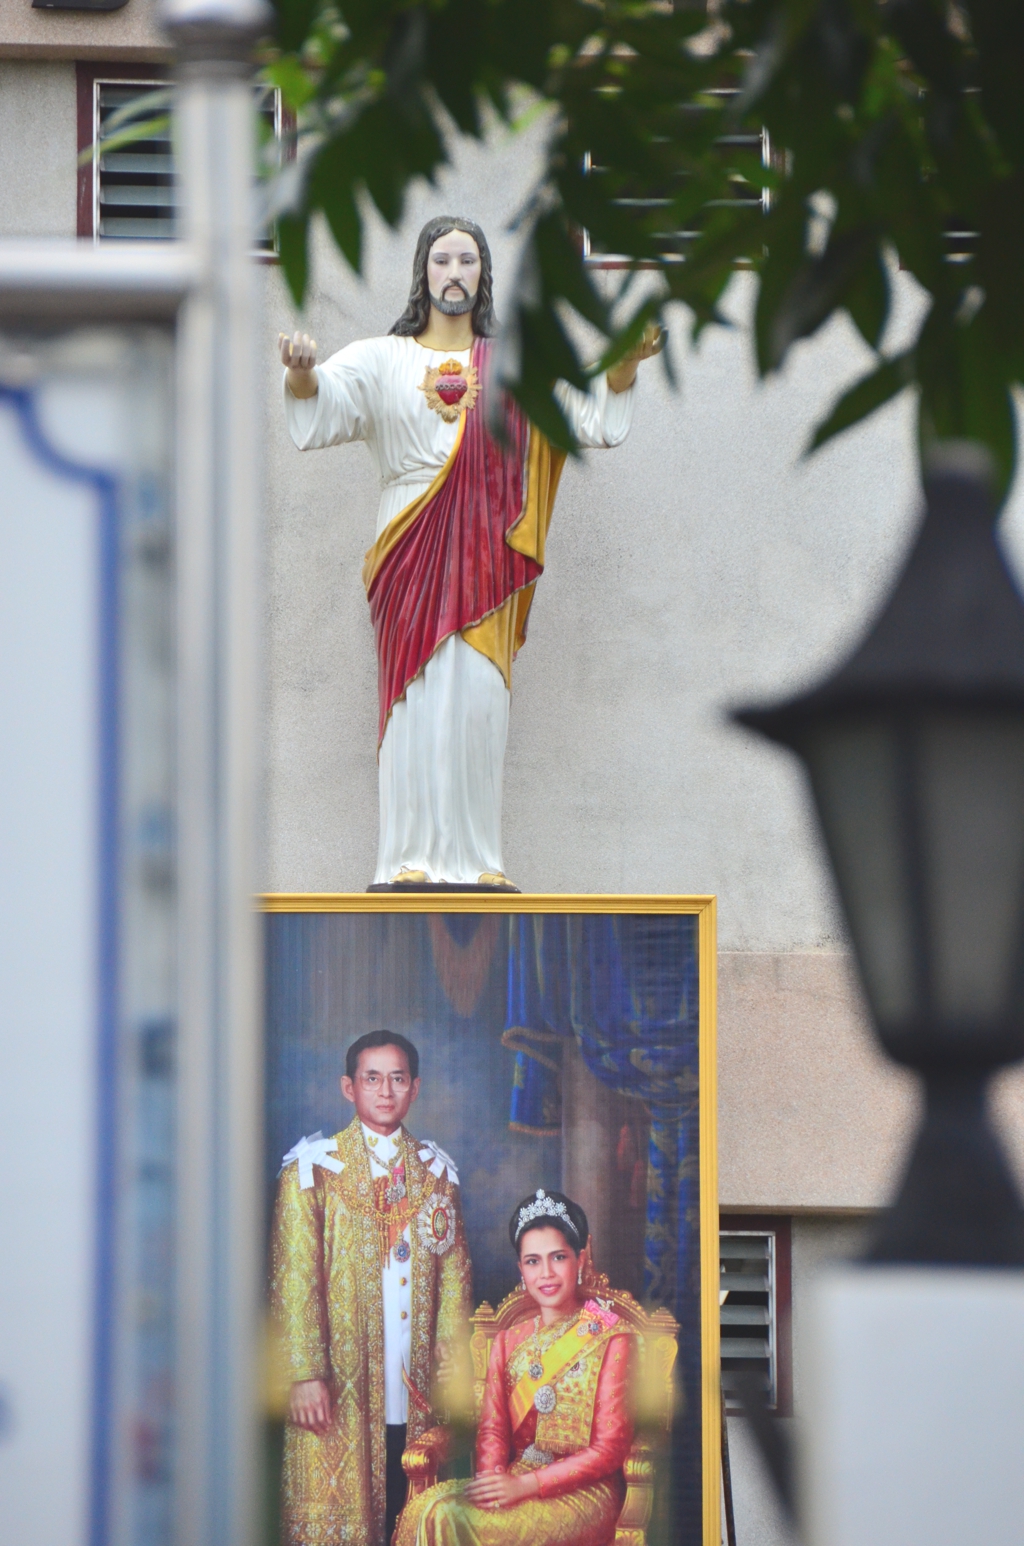 Not even the Christian Church is immune to Thailand's strict pro-royal social norms